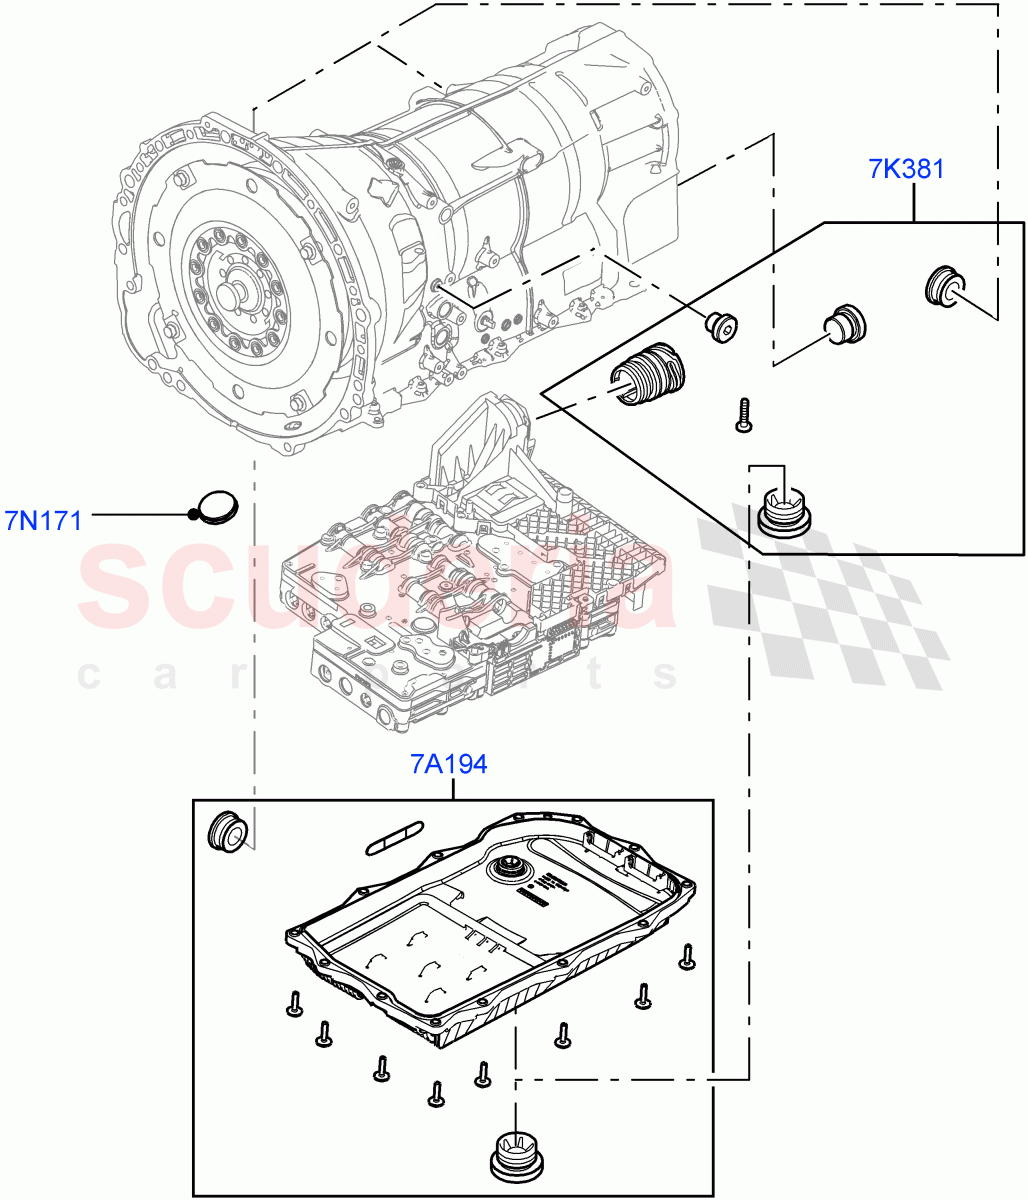 Transmission External Components(3.0 V6 Diesel,8 Speed Auto Trans ZF 8HP70 4WD)((V)FROMCA000001) of Land Rover Land Rover Discovery 4 (2010-2016) [3.0 Diesel 24V DOHC TC]